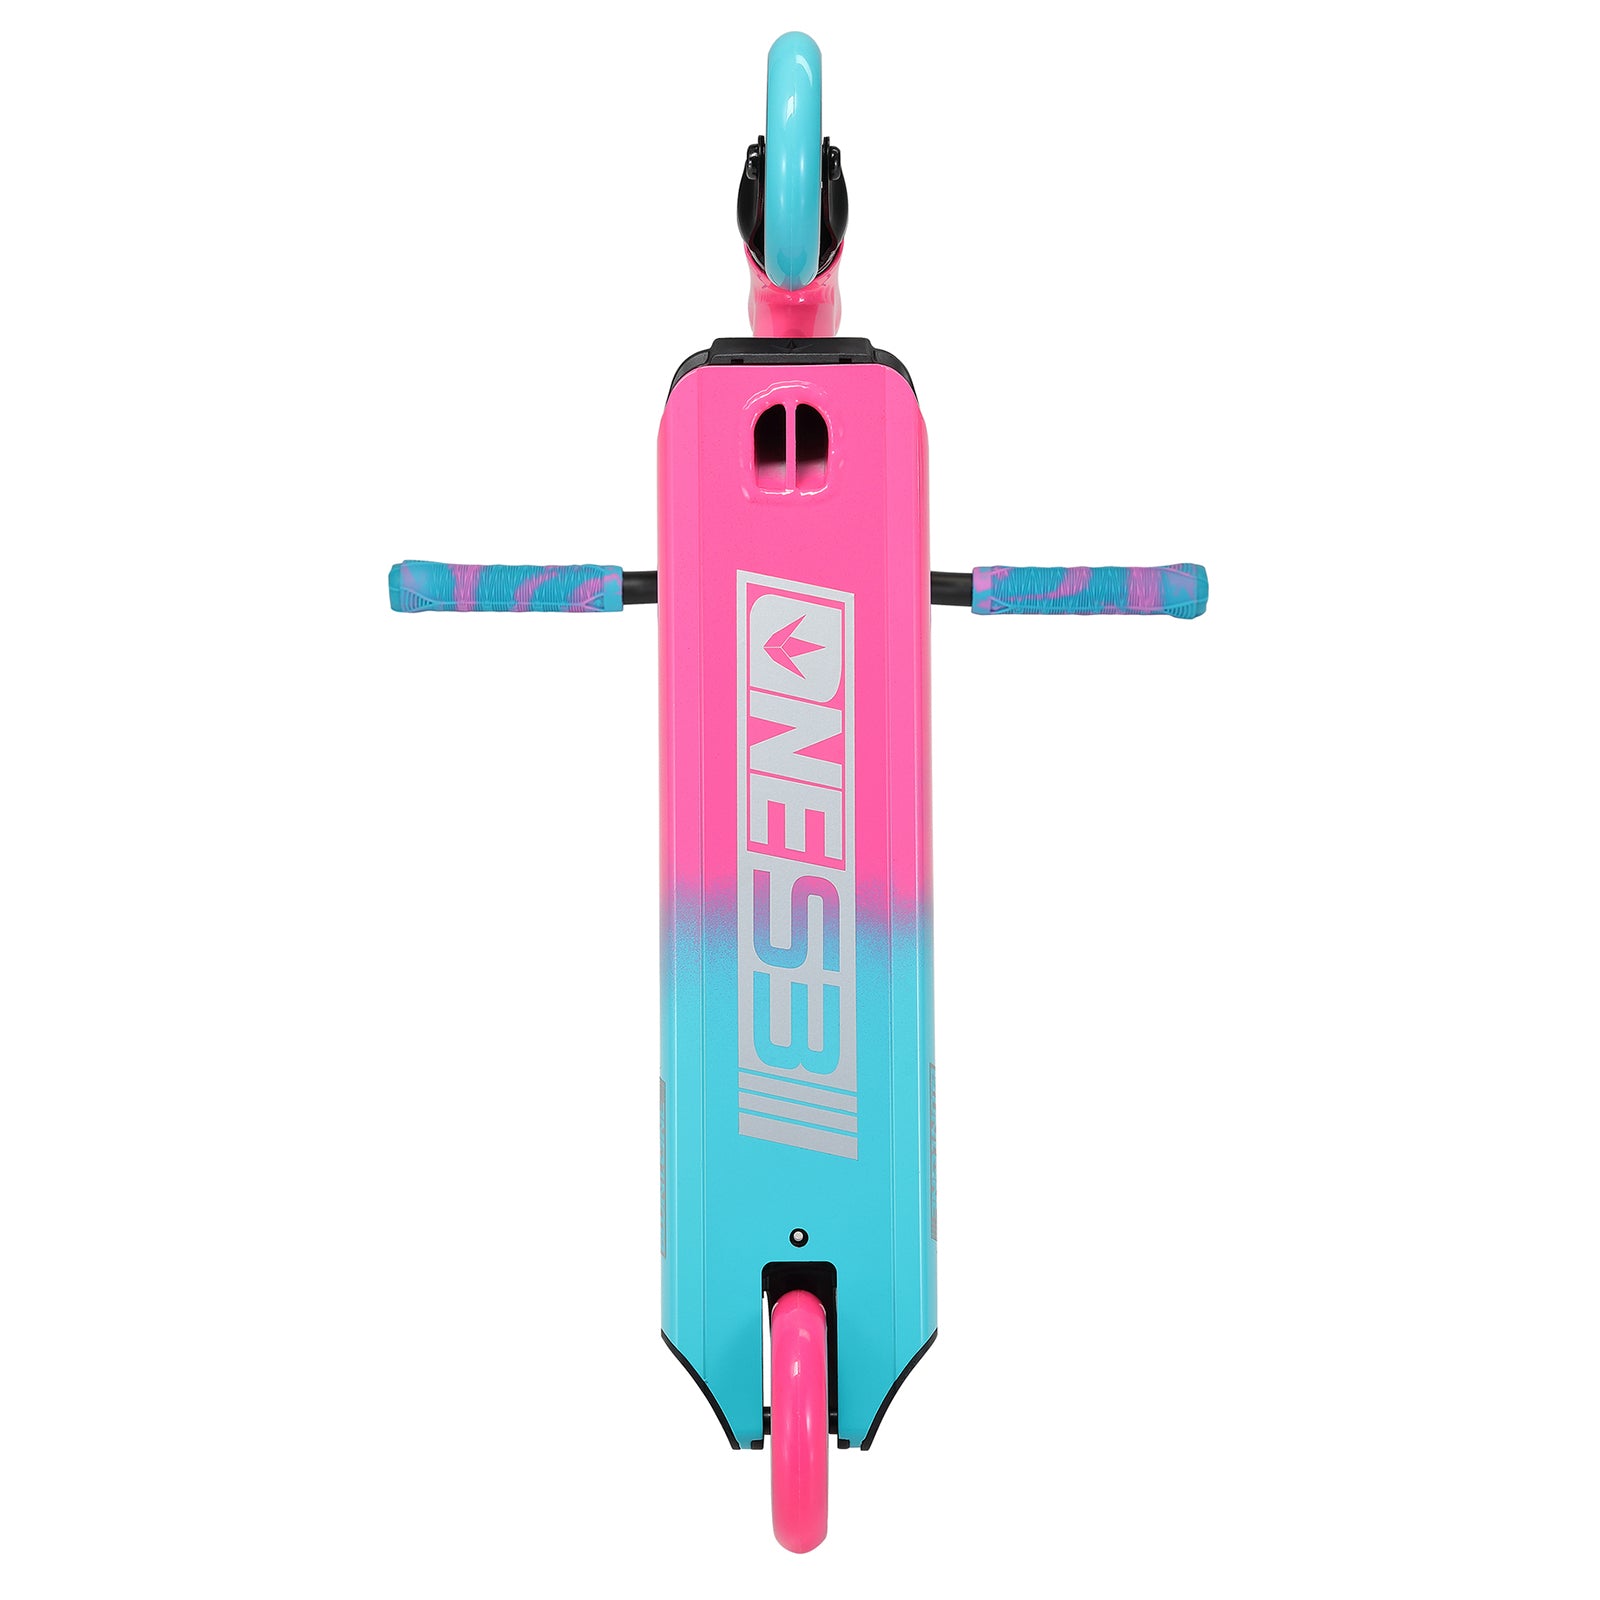 Envy One S3 Pink/Blue Complete Scooter